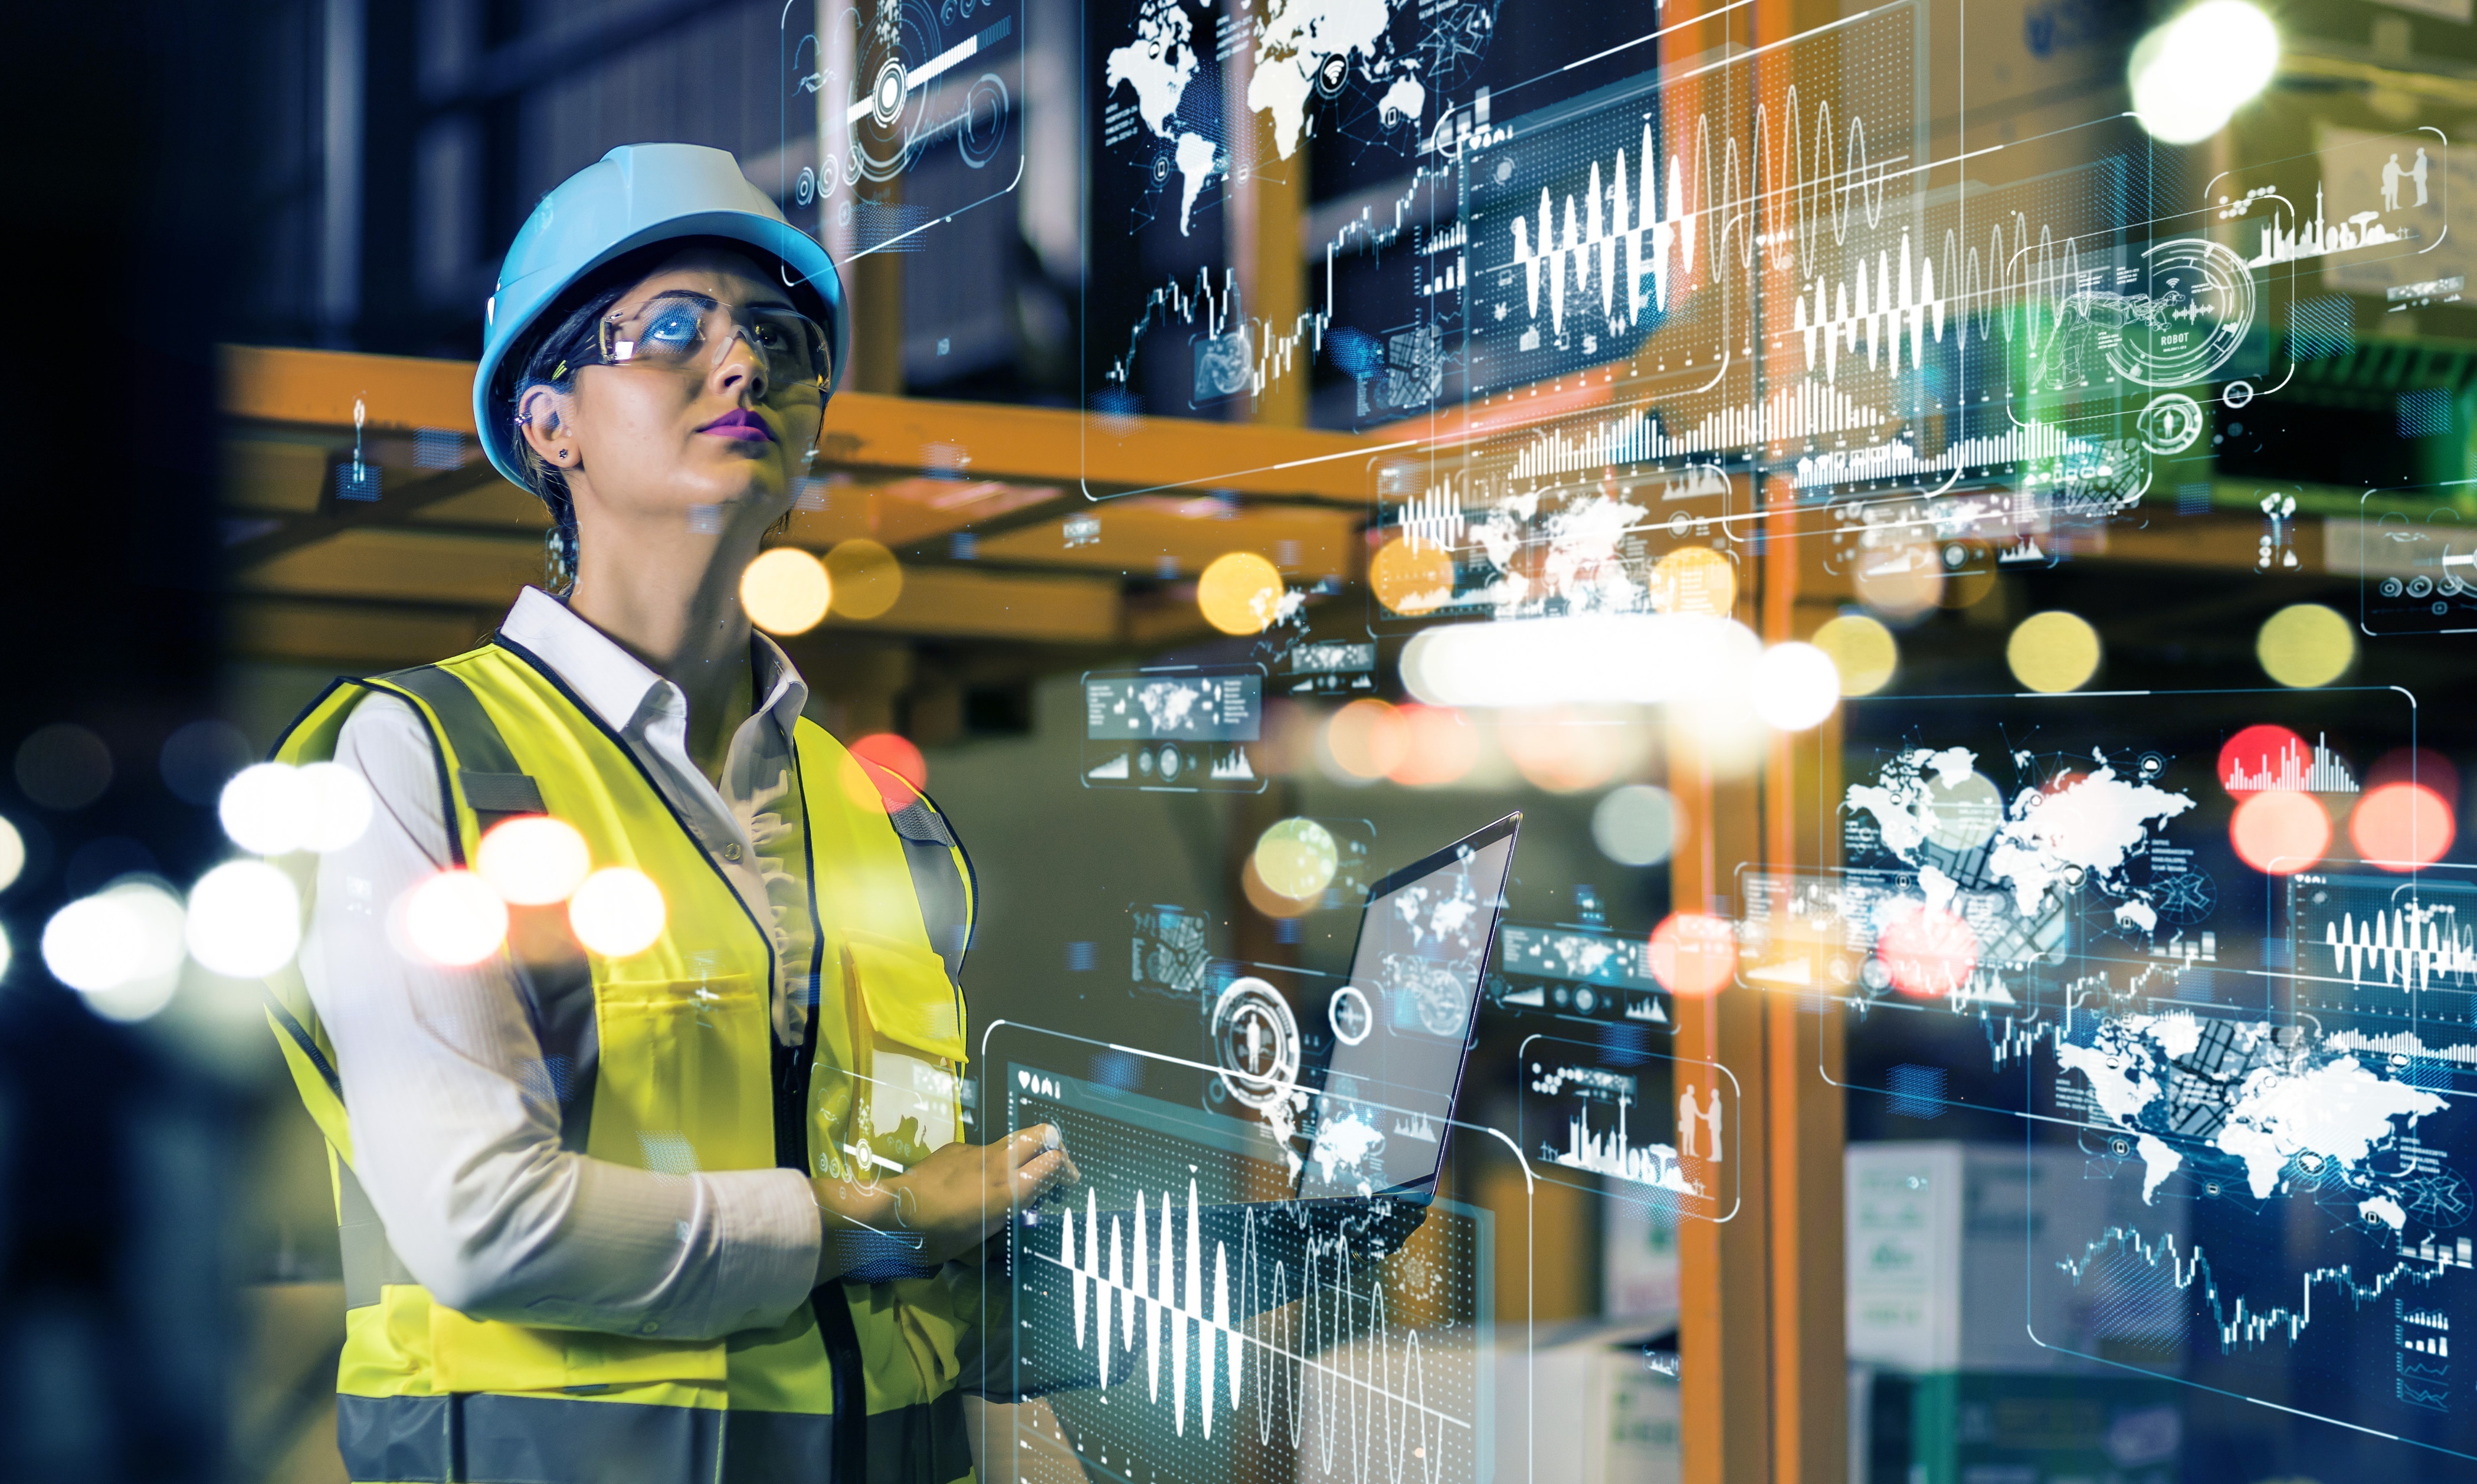 A woman wearing a hard hat and safety vest in an industrial setting, with digital data and graphs overlayed in the foreground.